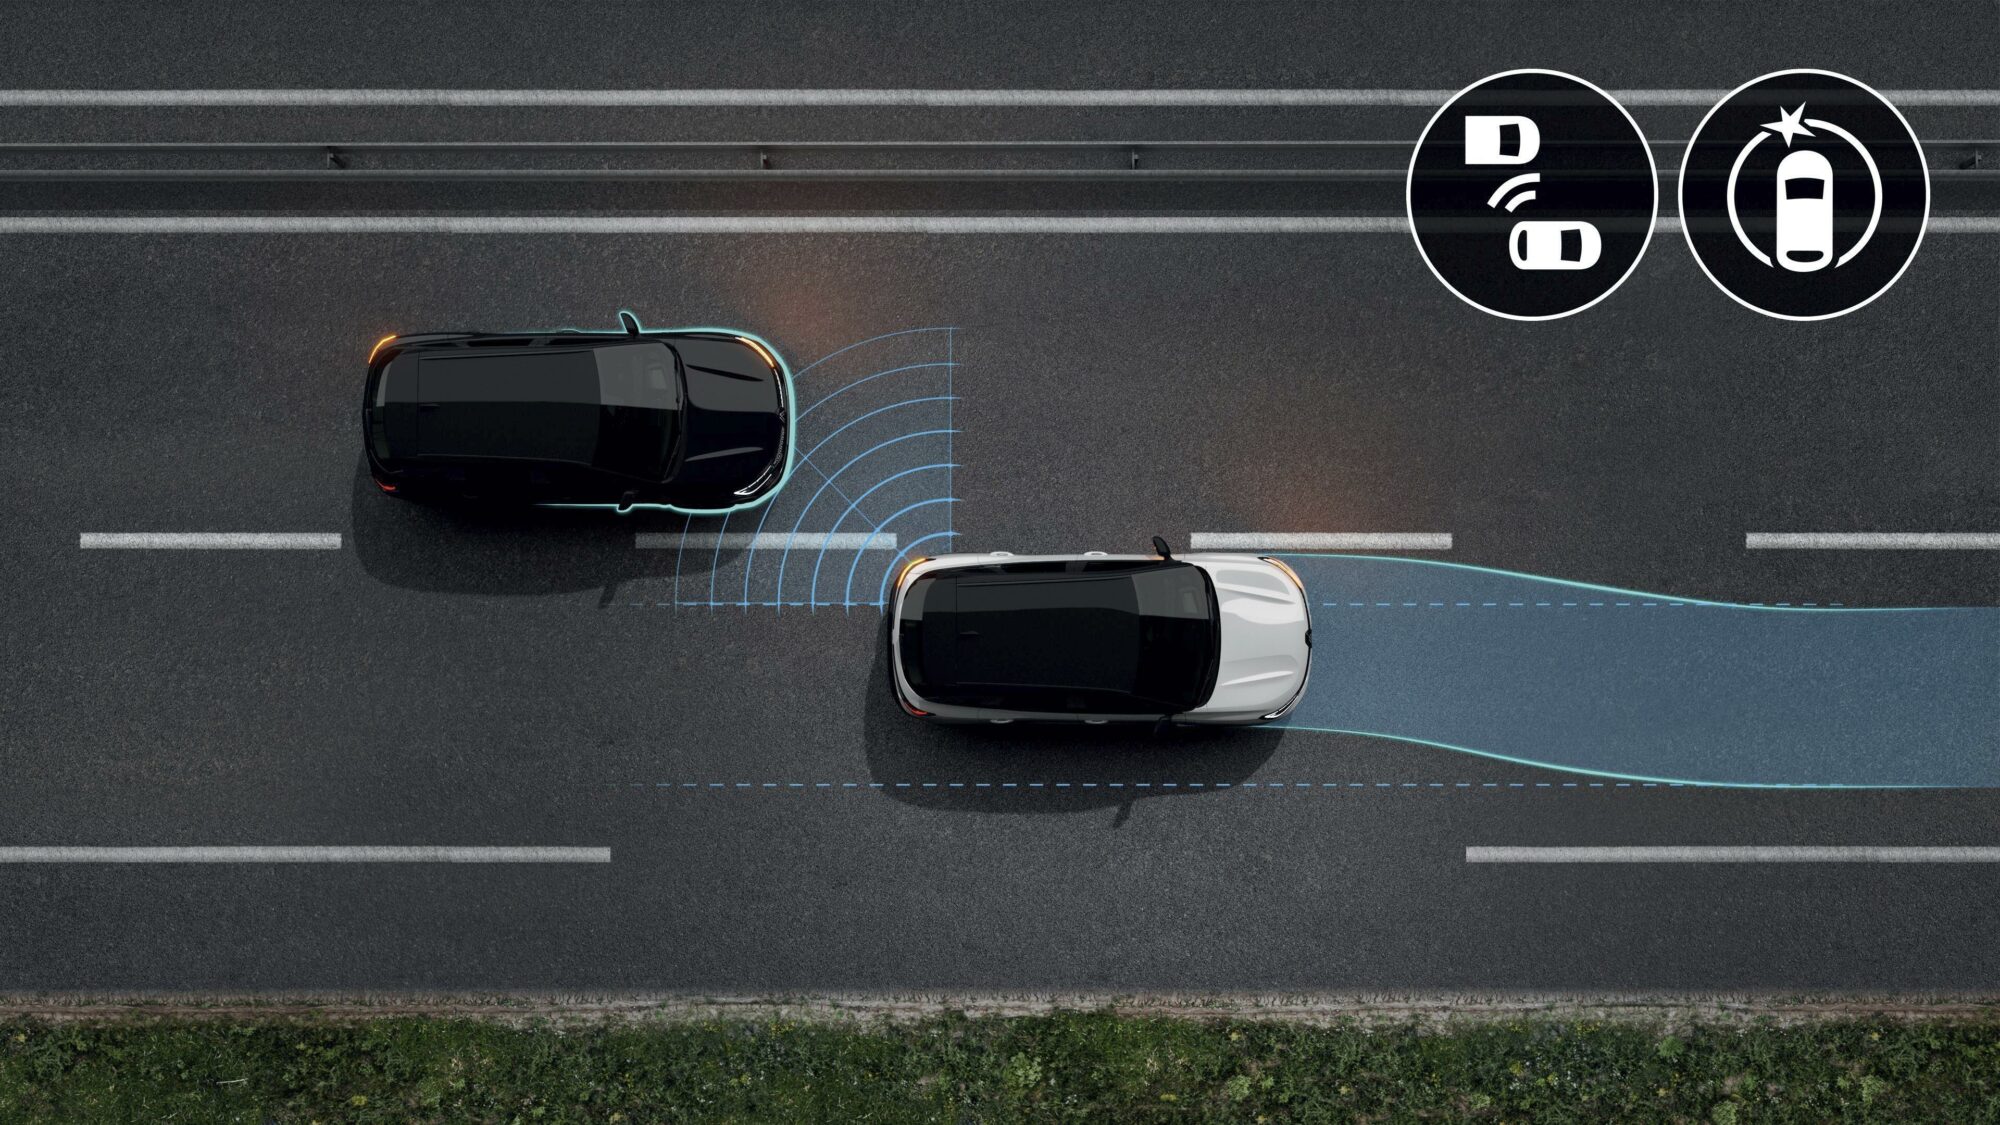 The All-New Renault Austral E-TECH Hybrid - ADAS - Blind spot warning and lane departure prevention when overtaking